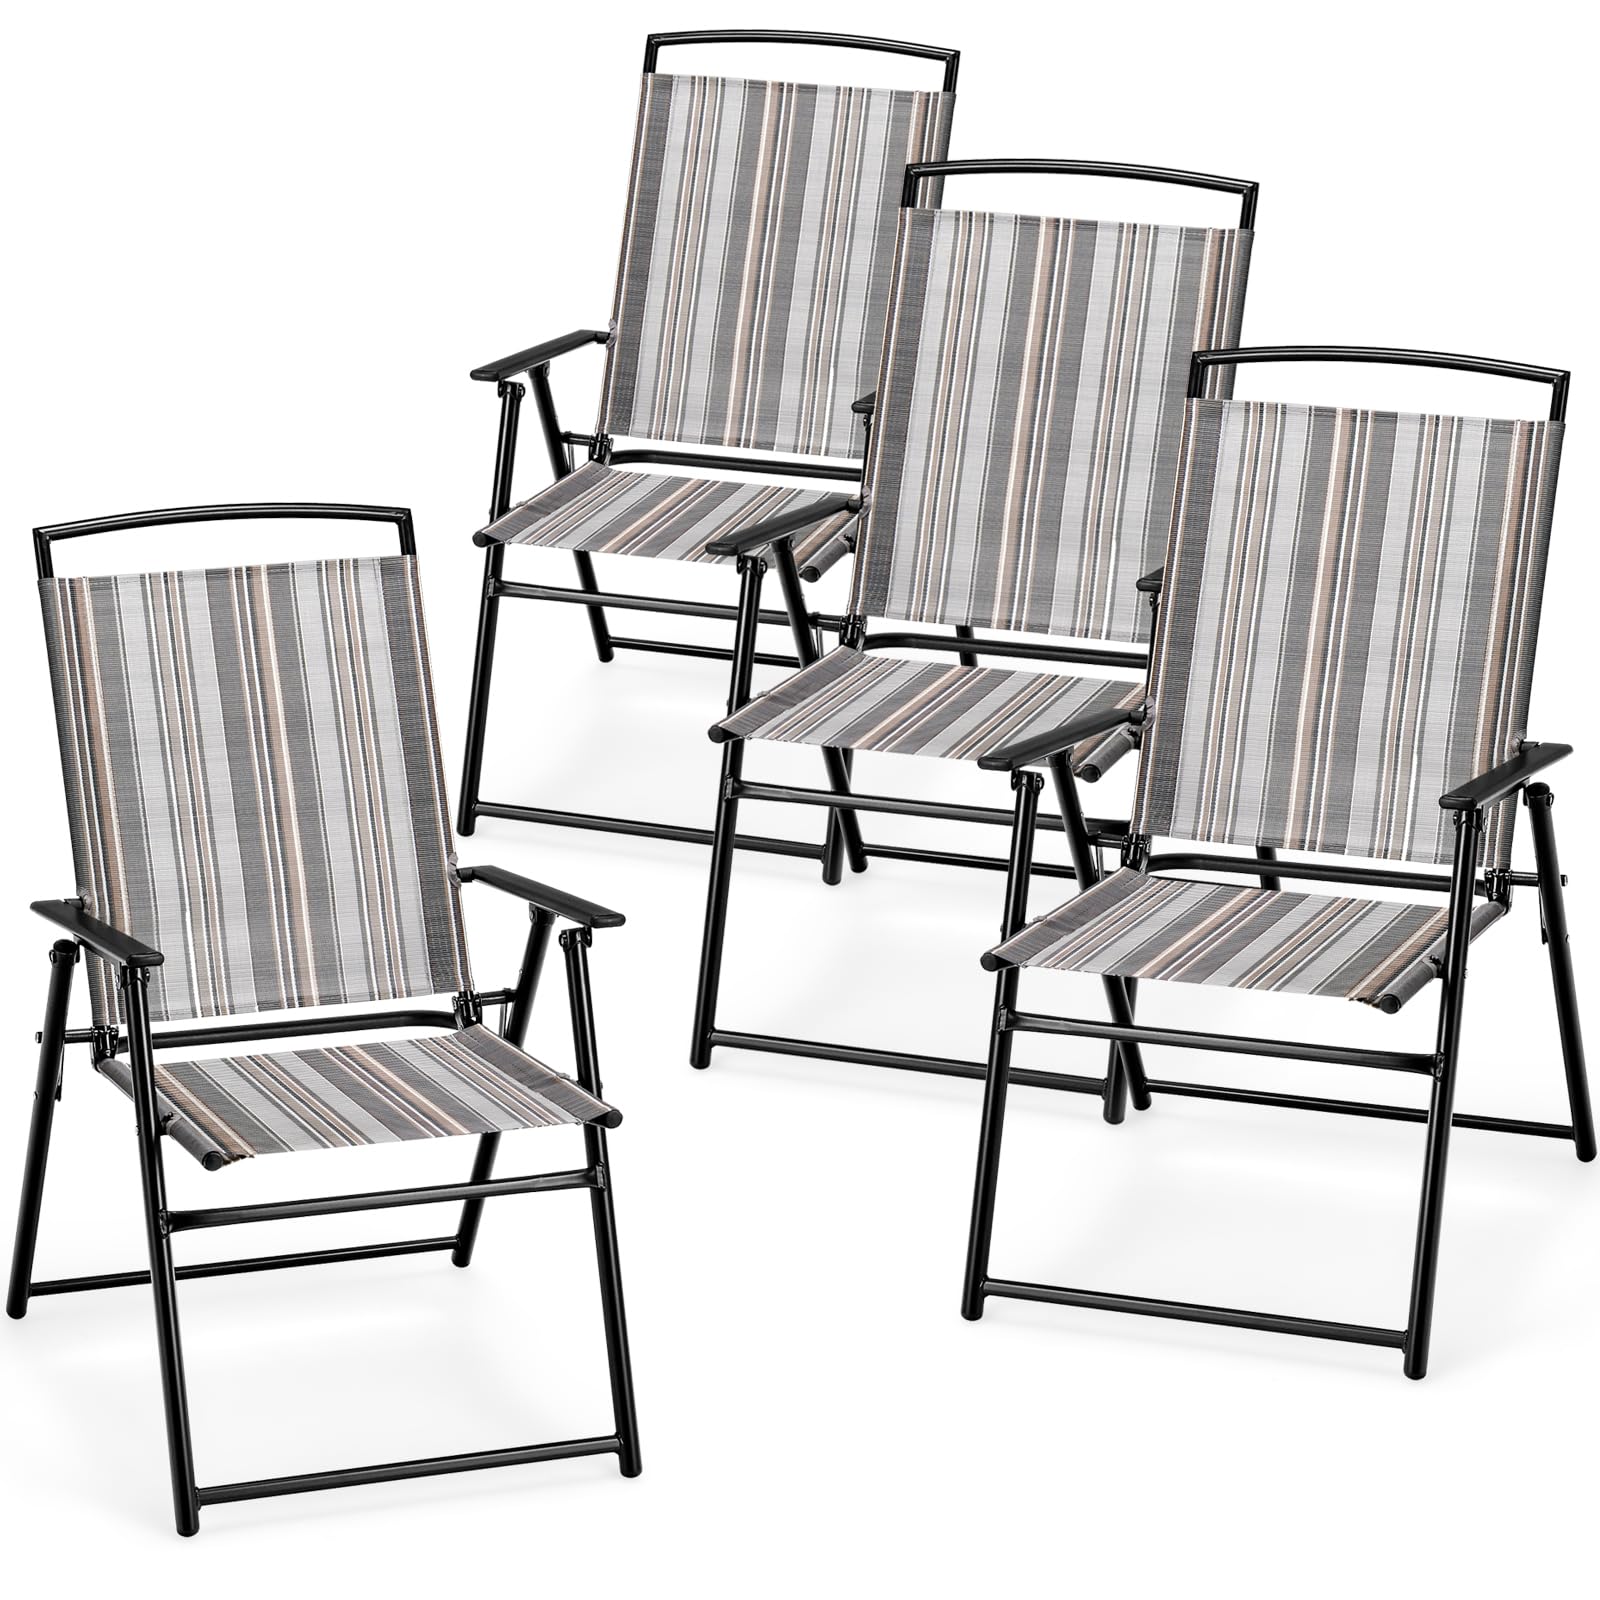 Giantex Patio Chairs Set of 2/4, Outdoor Folding Chairs with Armrests, Metal Frame